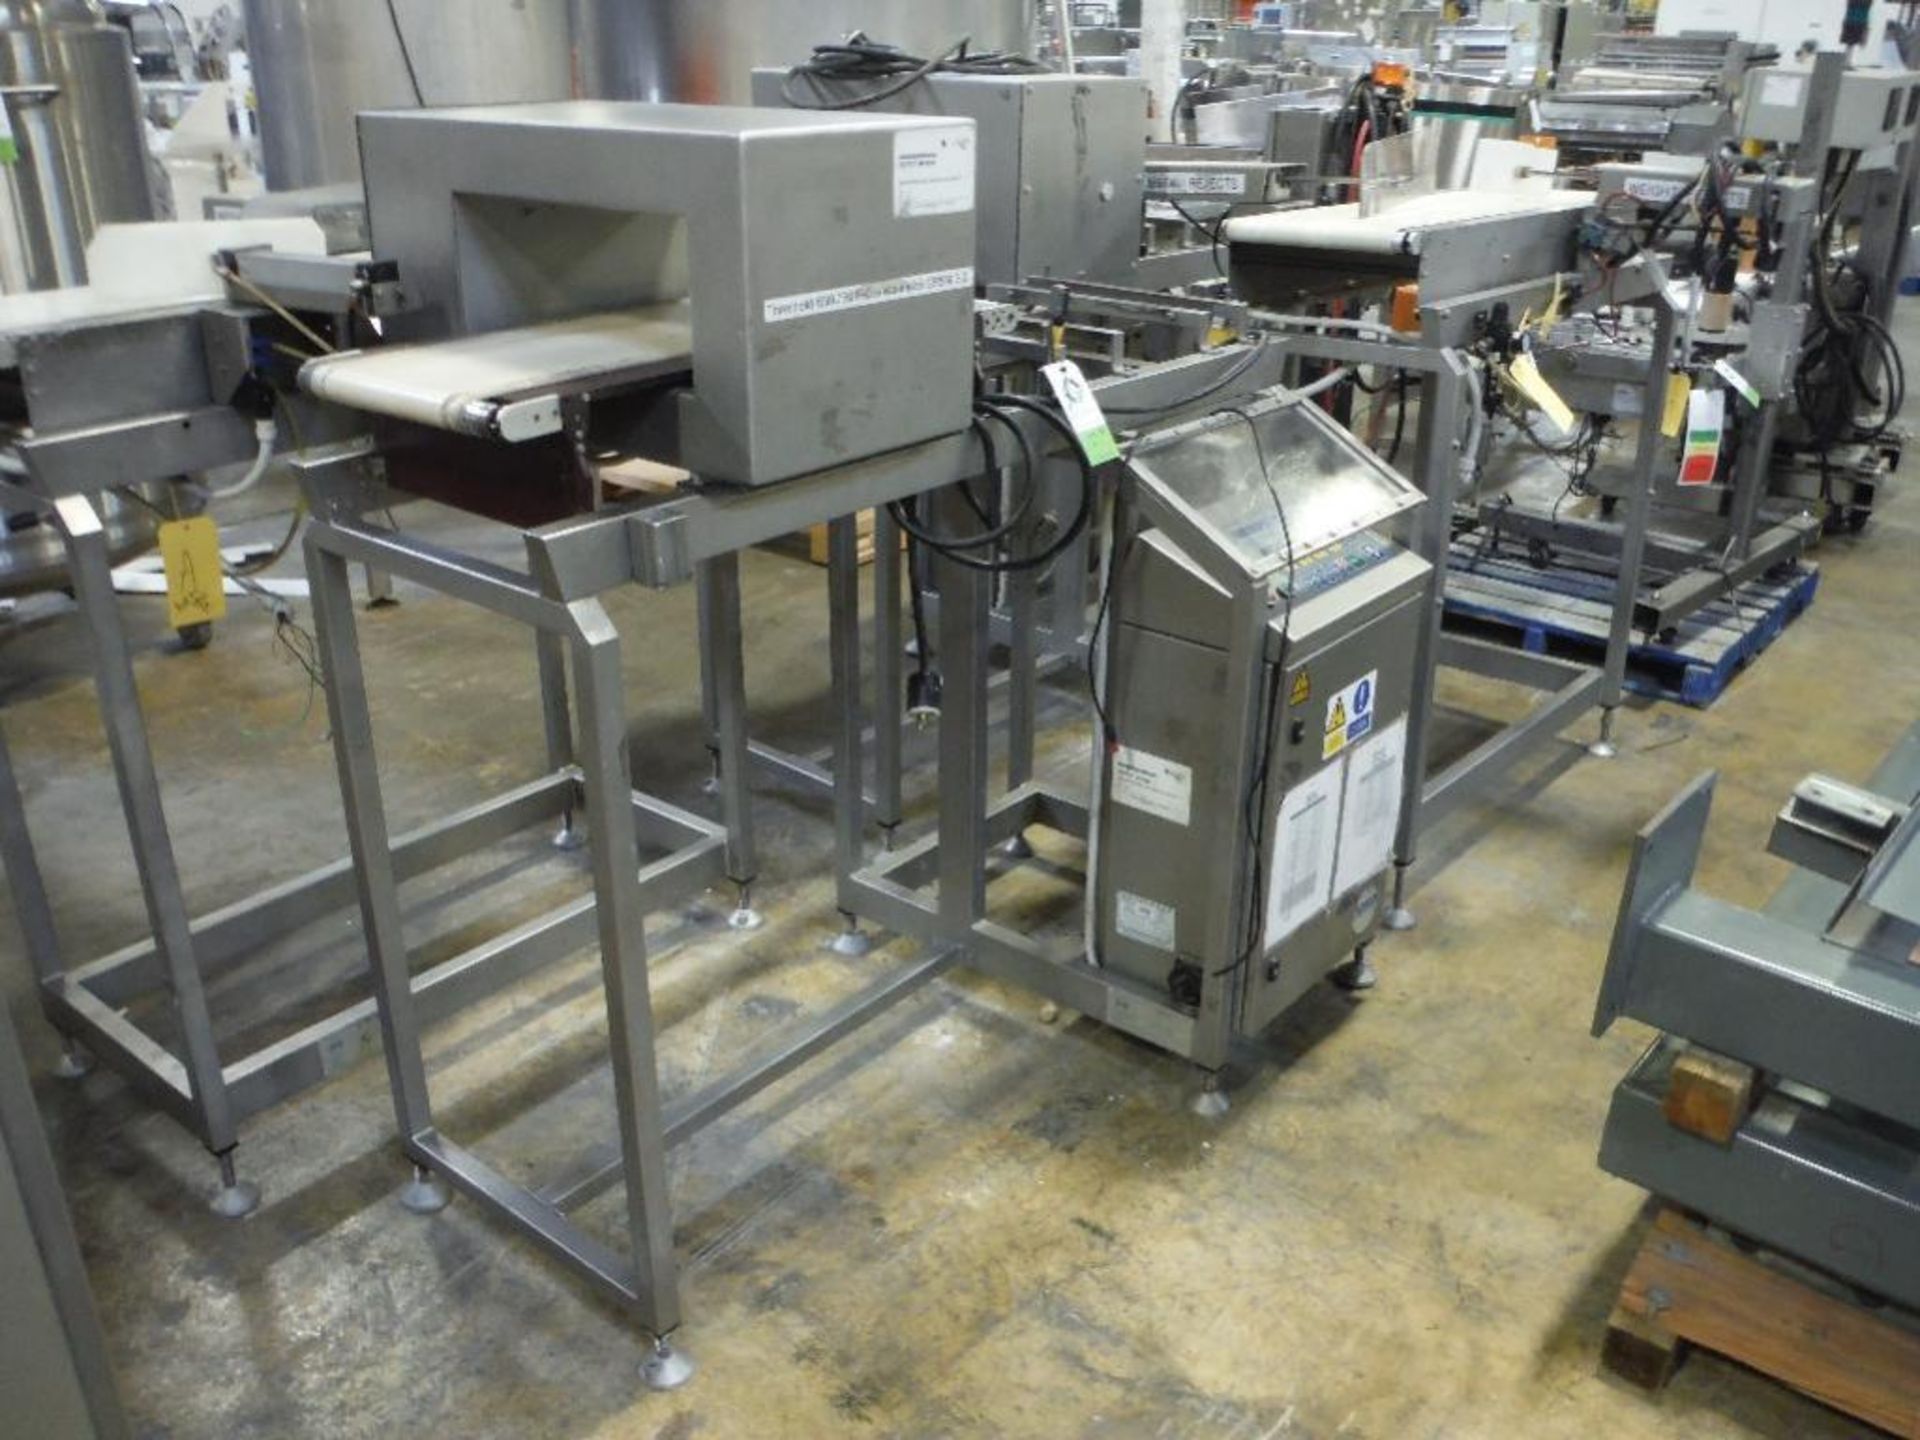 1997 Loma metal detector/check weigher combo, metal detector aperture 17.5 in. wide x 7 in. tall, Lo